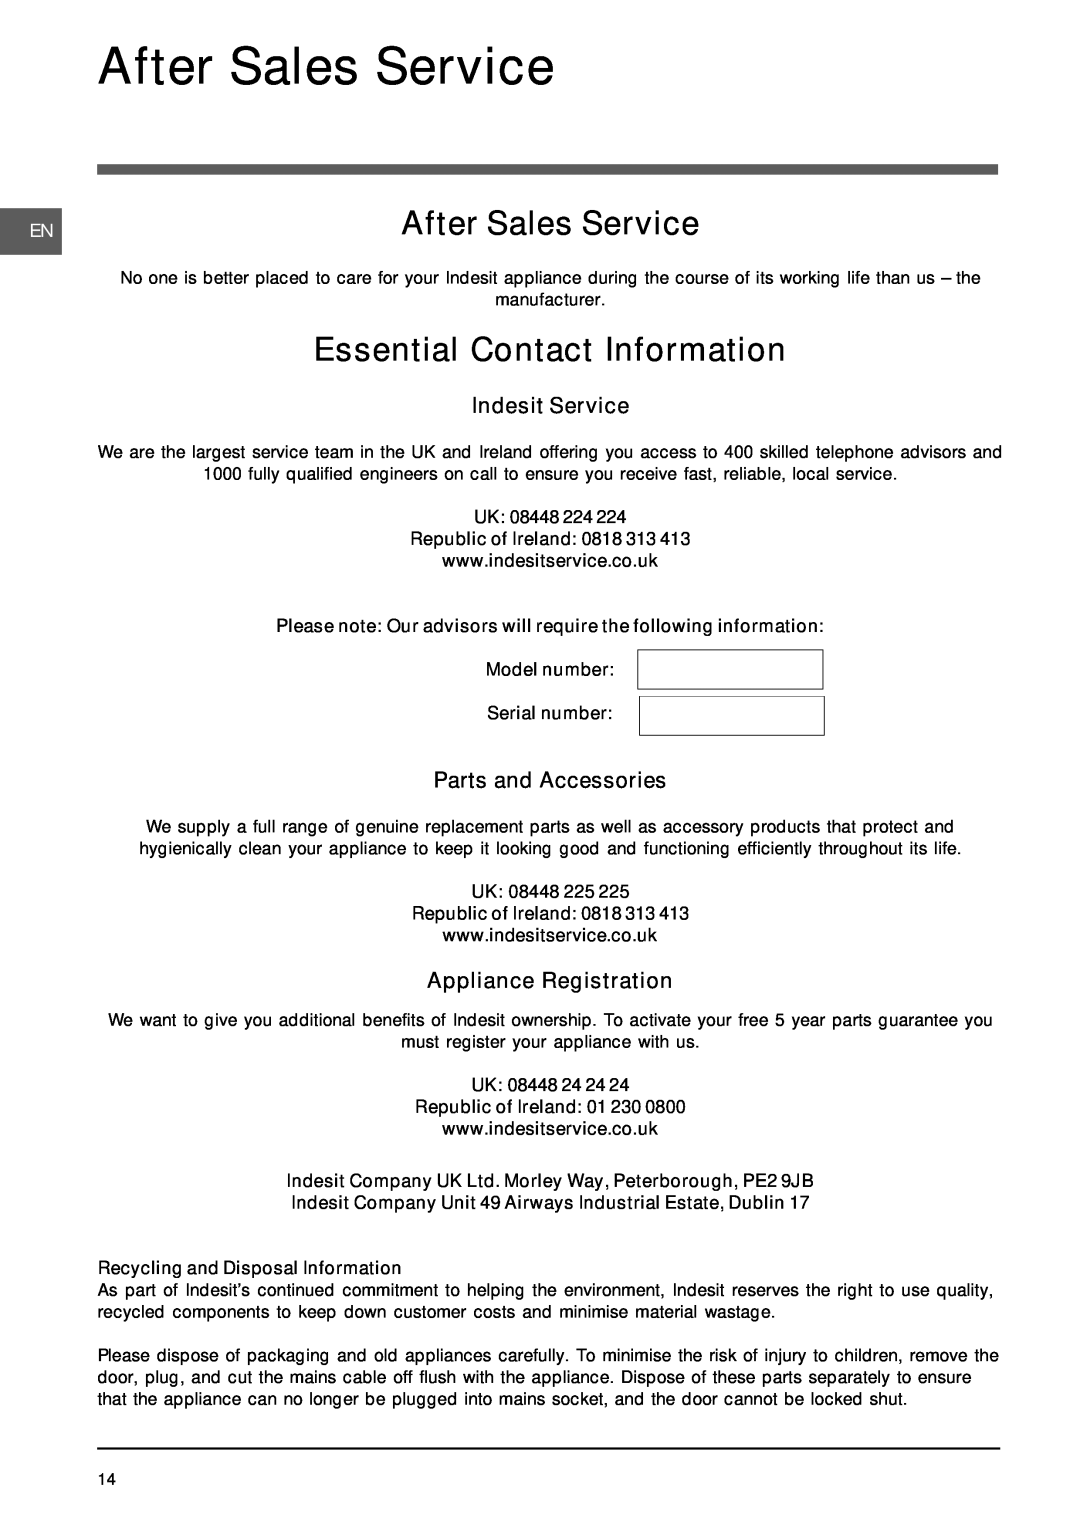 Indesit DIF 1614 operating instructions After Sales Service, Essential Contact Information 